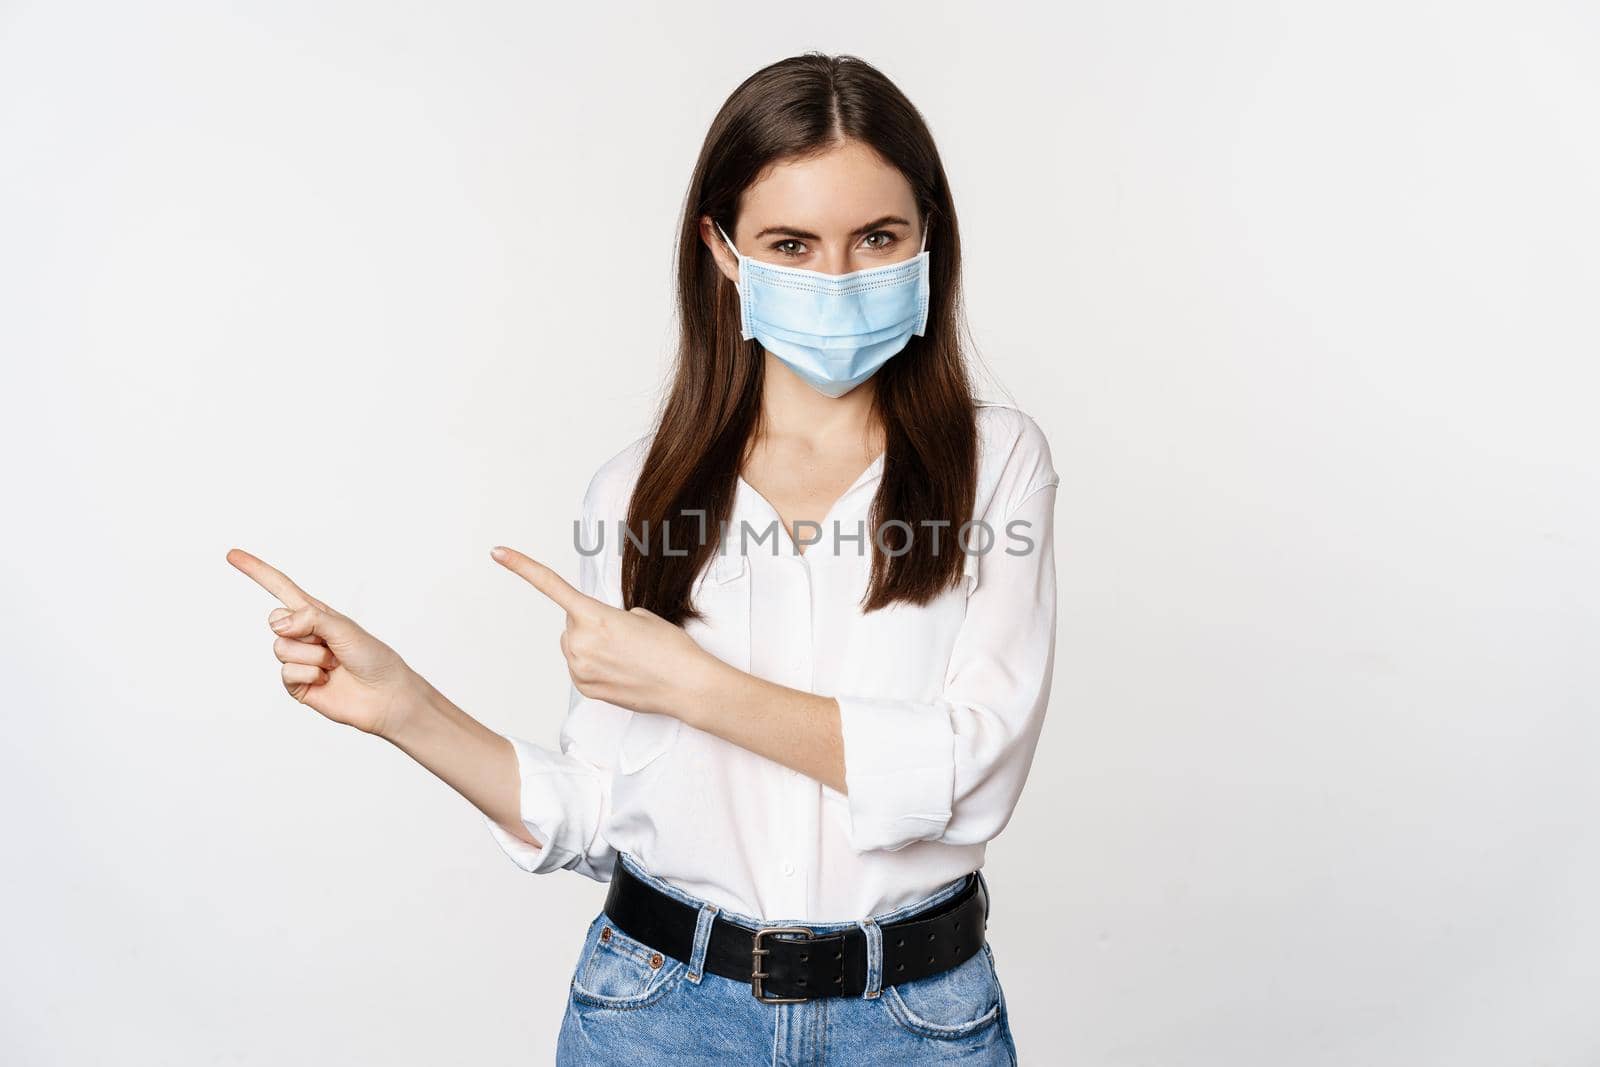 Portrait of corporate woman in face medical mask, pointing fingers left, showing logo, company banner, standing against white background.